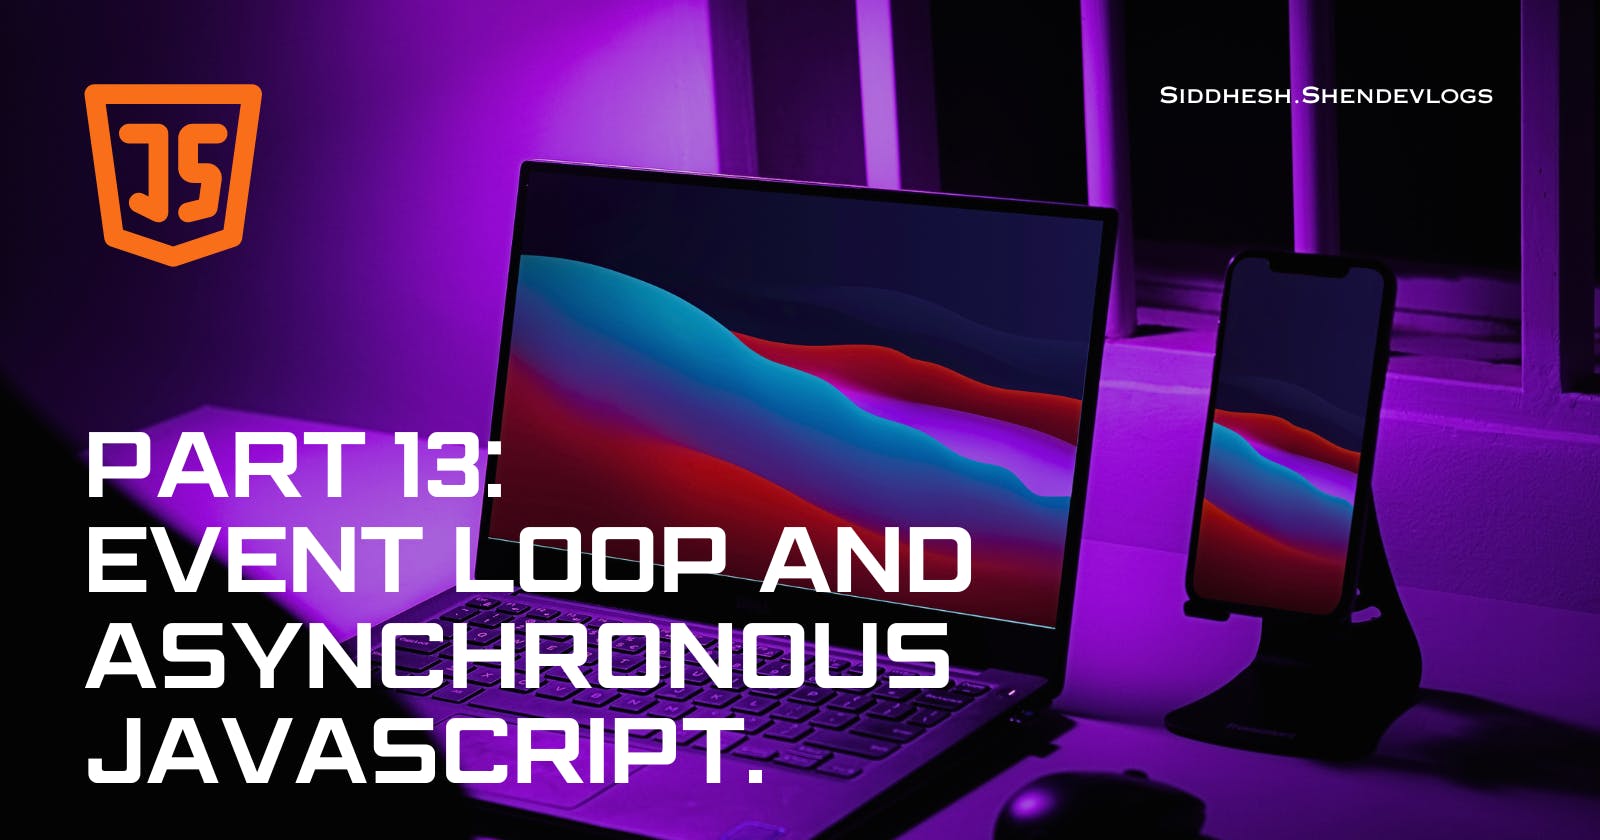 Learn Event Loop And Asynchronous JavaScript.